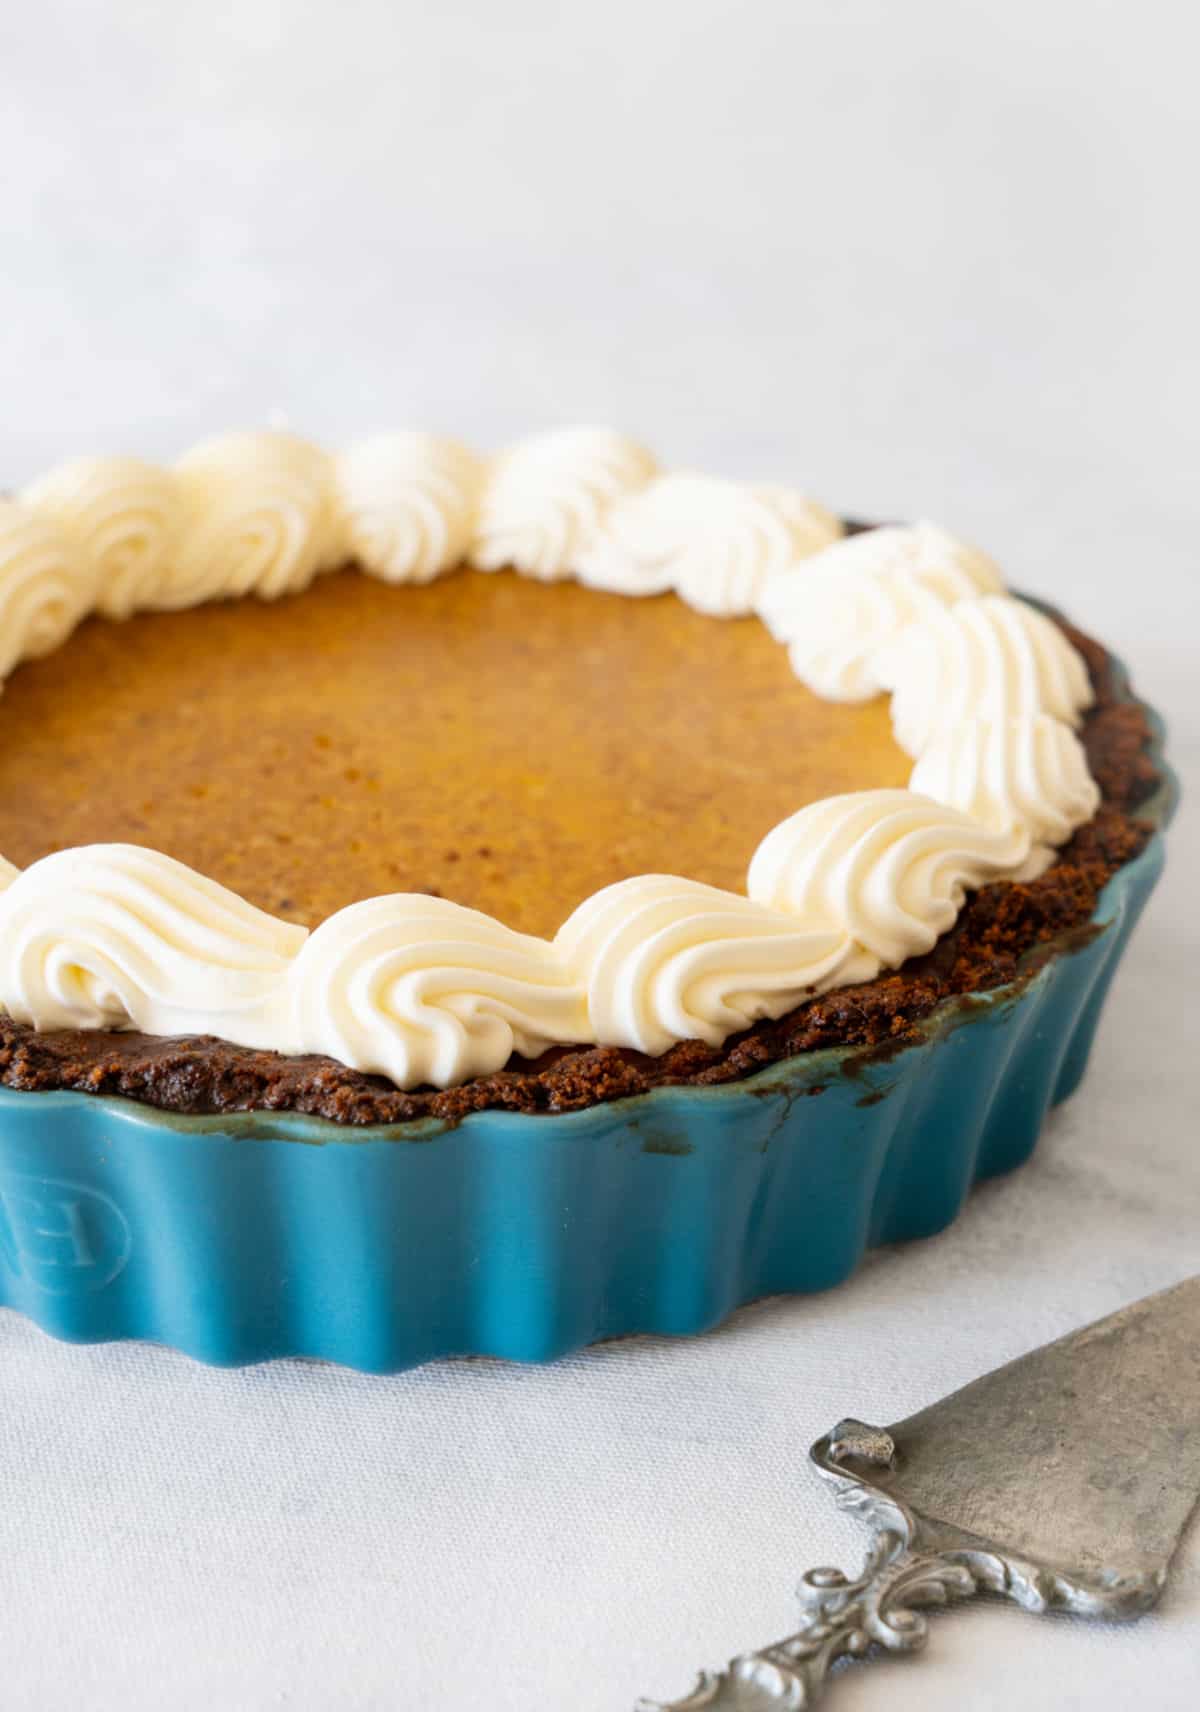 Partial view of teal pie dish with pumpkin cream pie. Light grey surface and background. Silver cake server. 